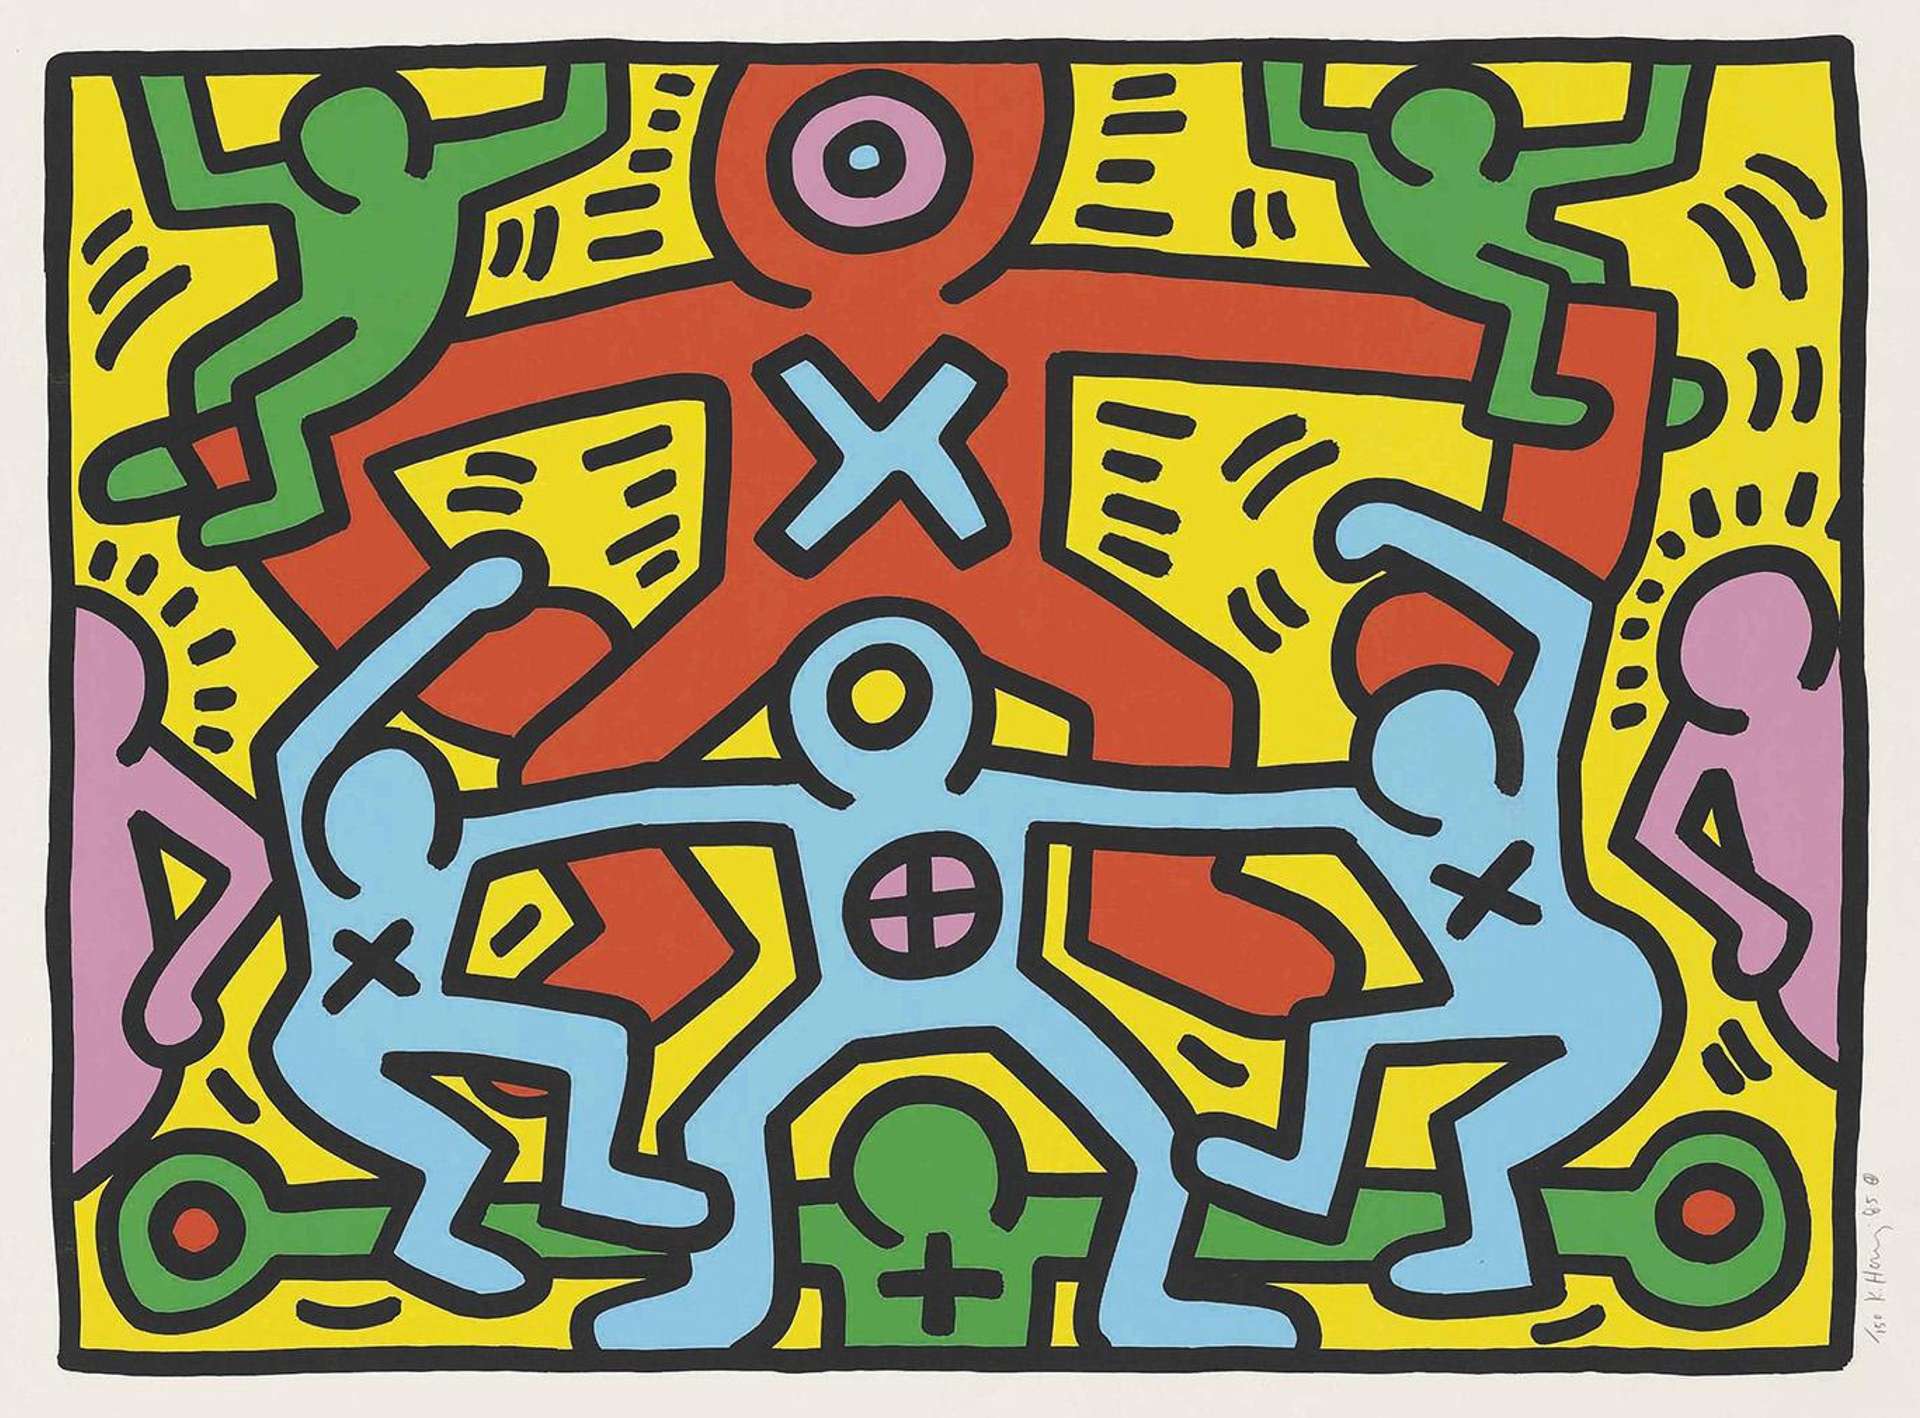 Untitled 1985 - Signed Print by Keith Haring 1985 - MyArtBroker